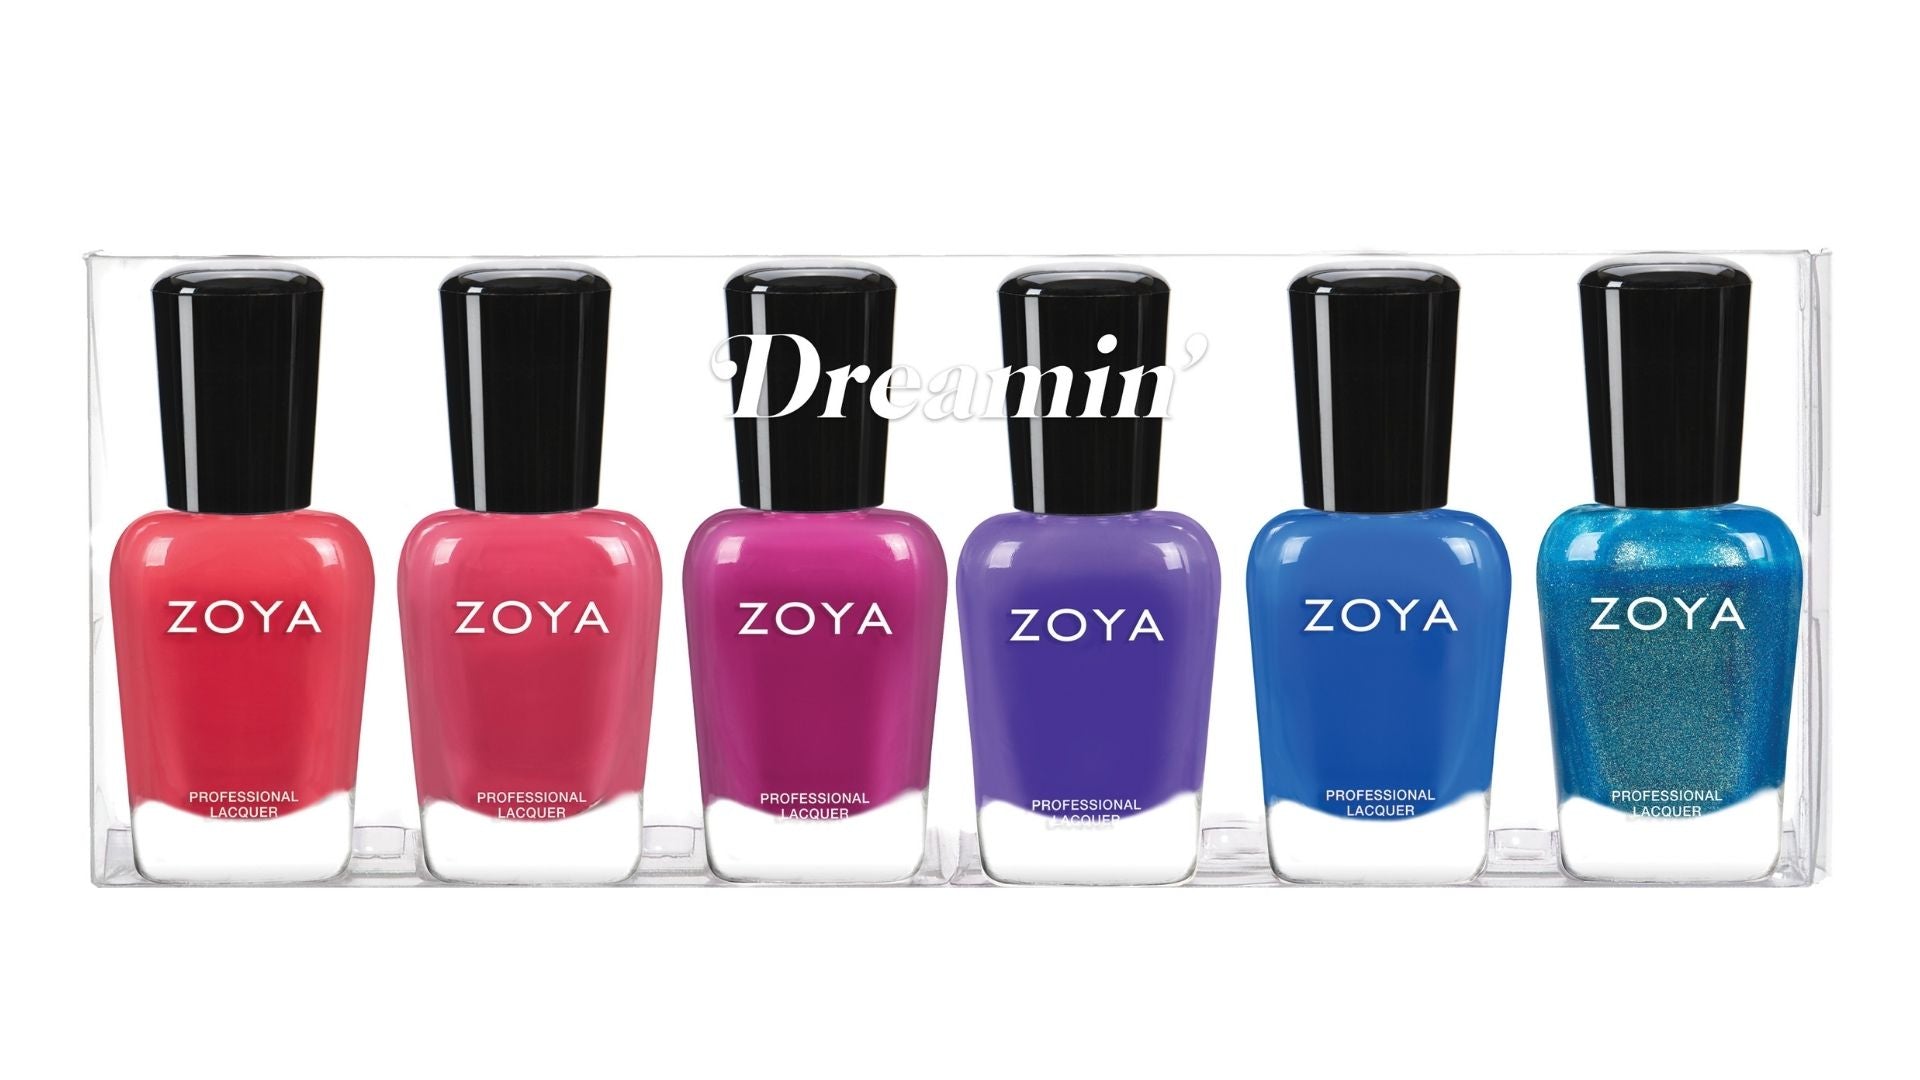 review, photos, ingredients, trends, nail polish, nail care, zoya, summer 2021 collection, dreamin', best summer nail polishes, best high end nail lacquers, desi, polly, darla, skipper, mateo, summer